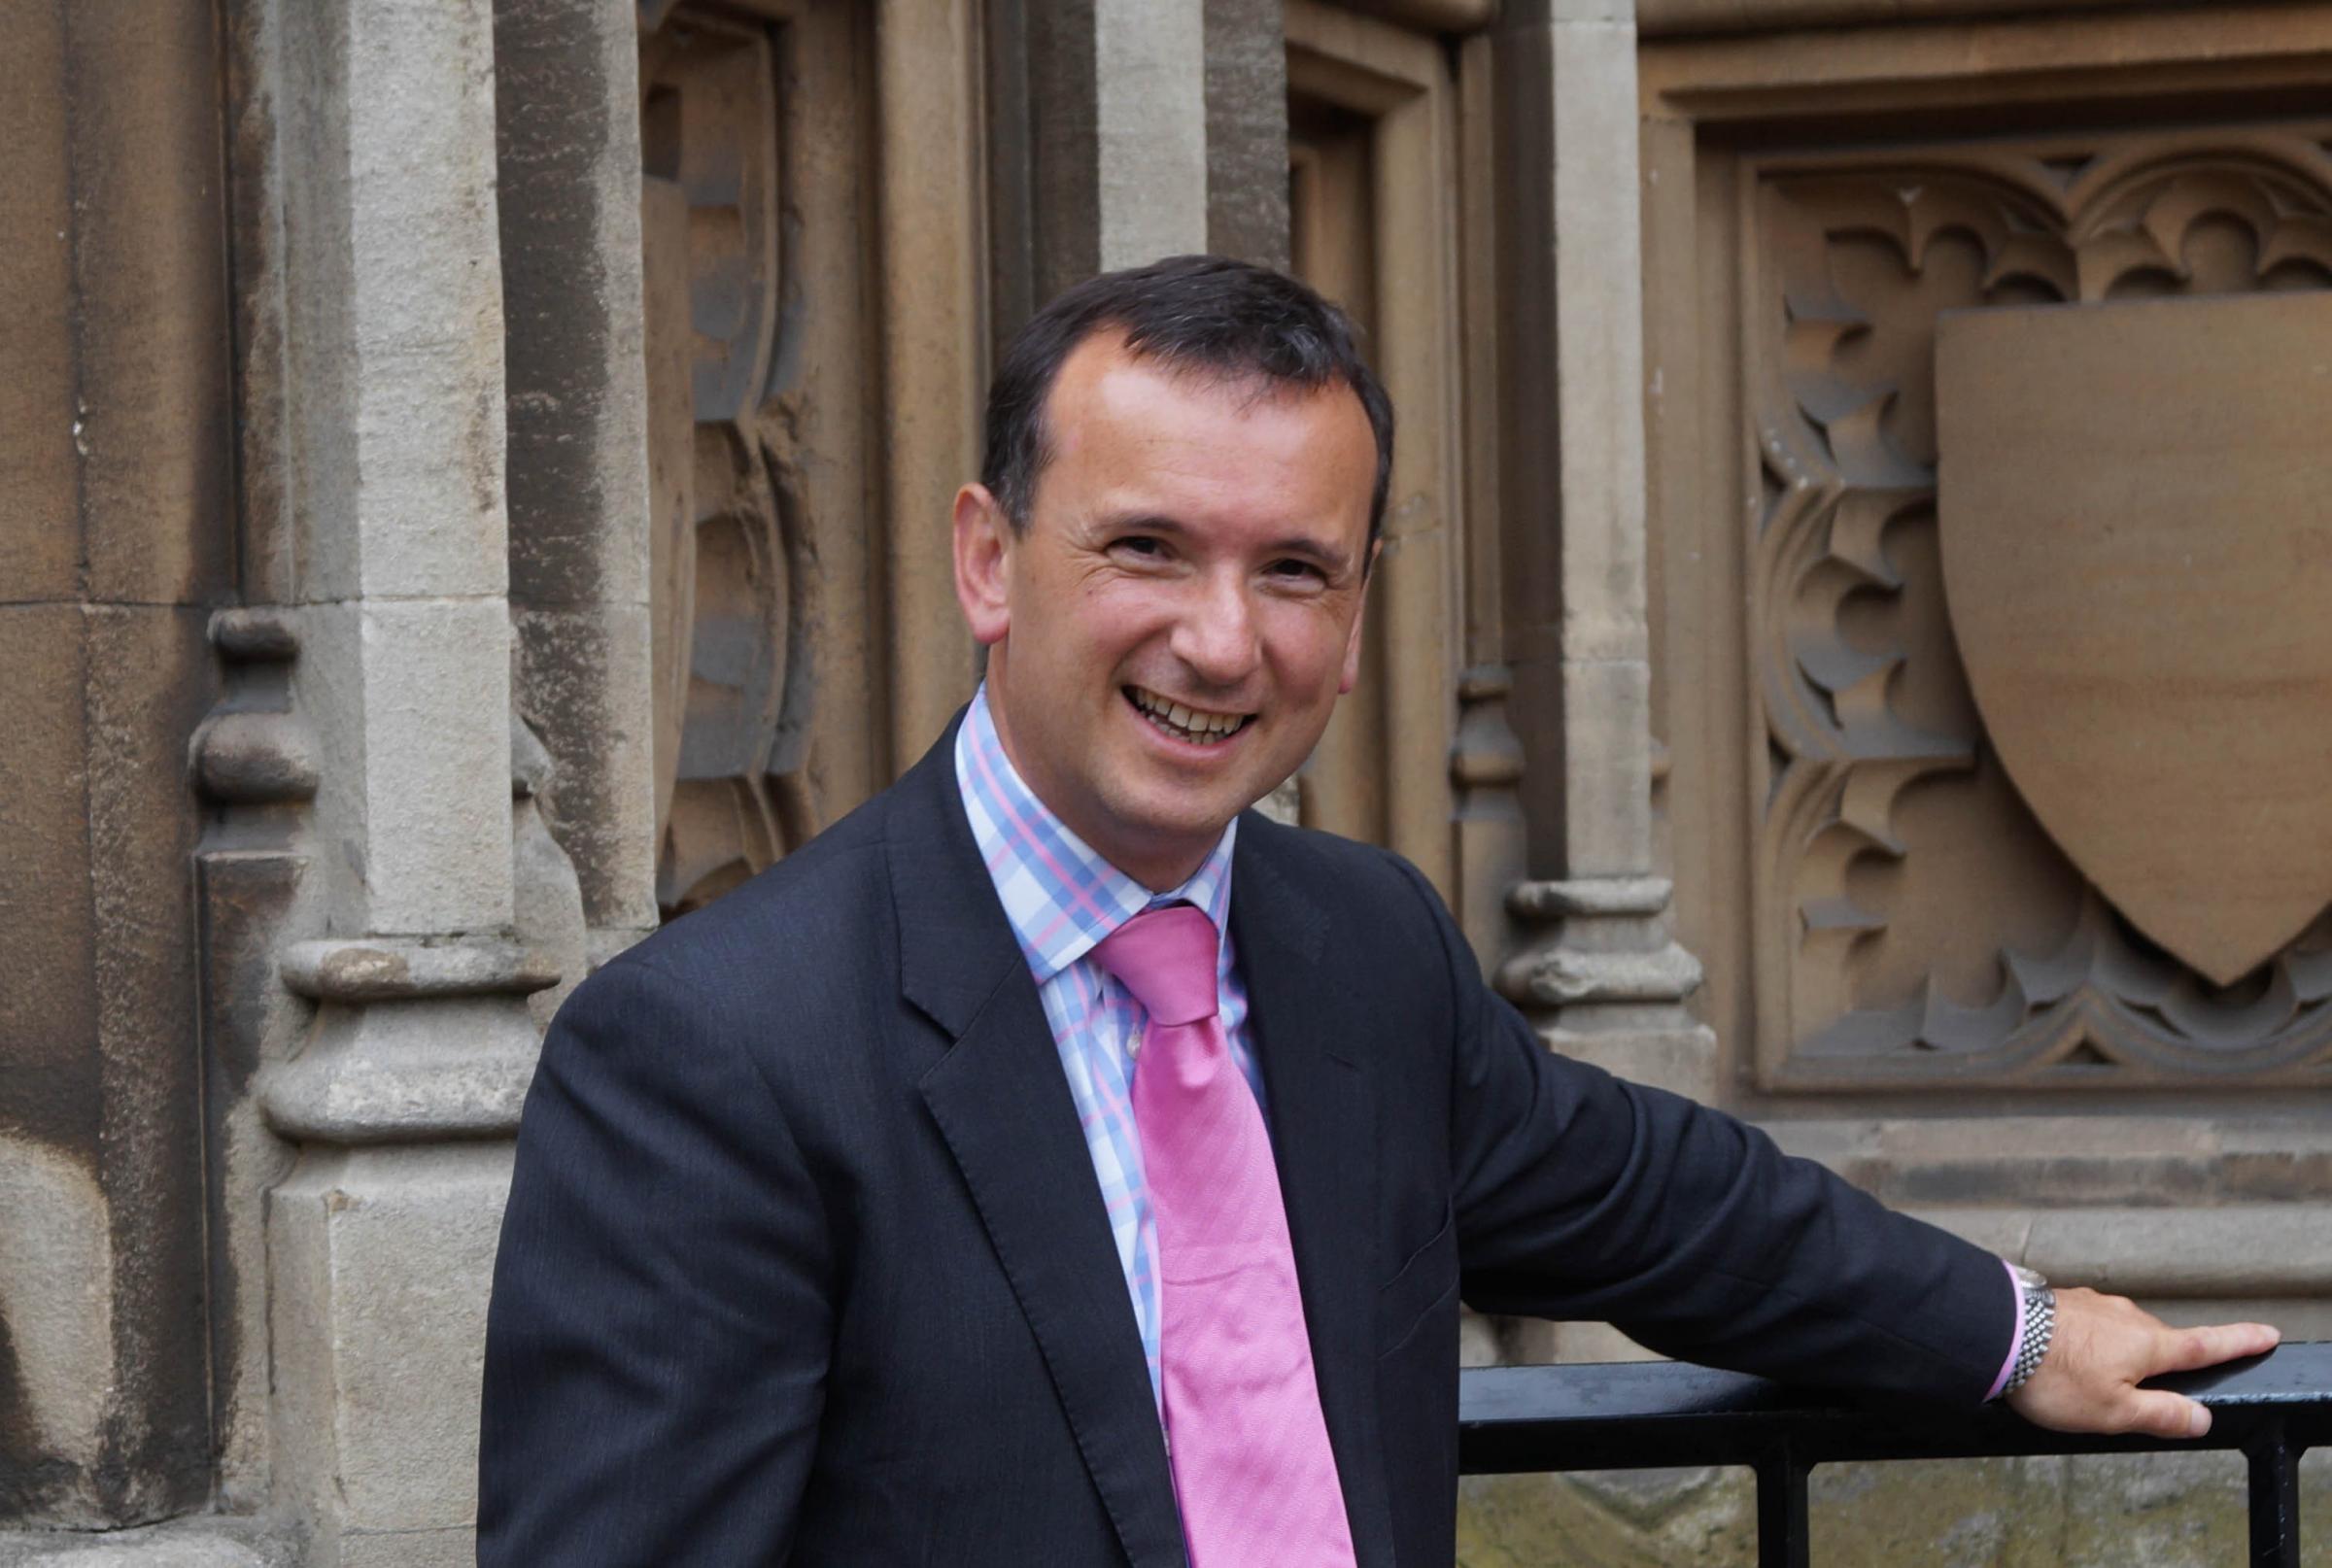 VIEW FROM WESTMINSTER: More needed to help small businesses - Alun Cairns MP - Barry and District News